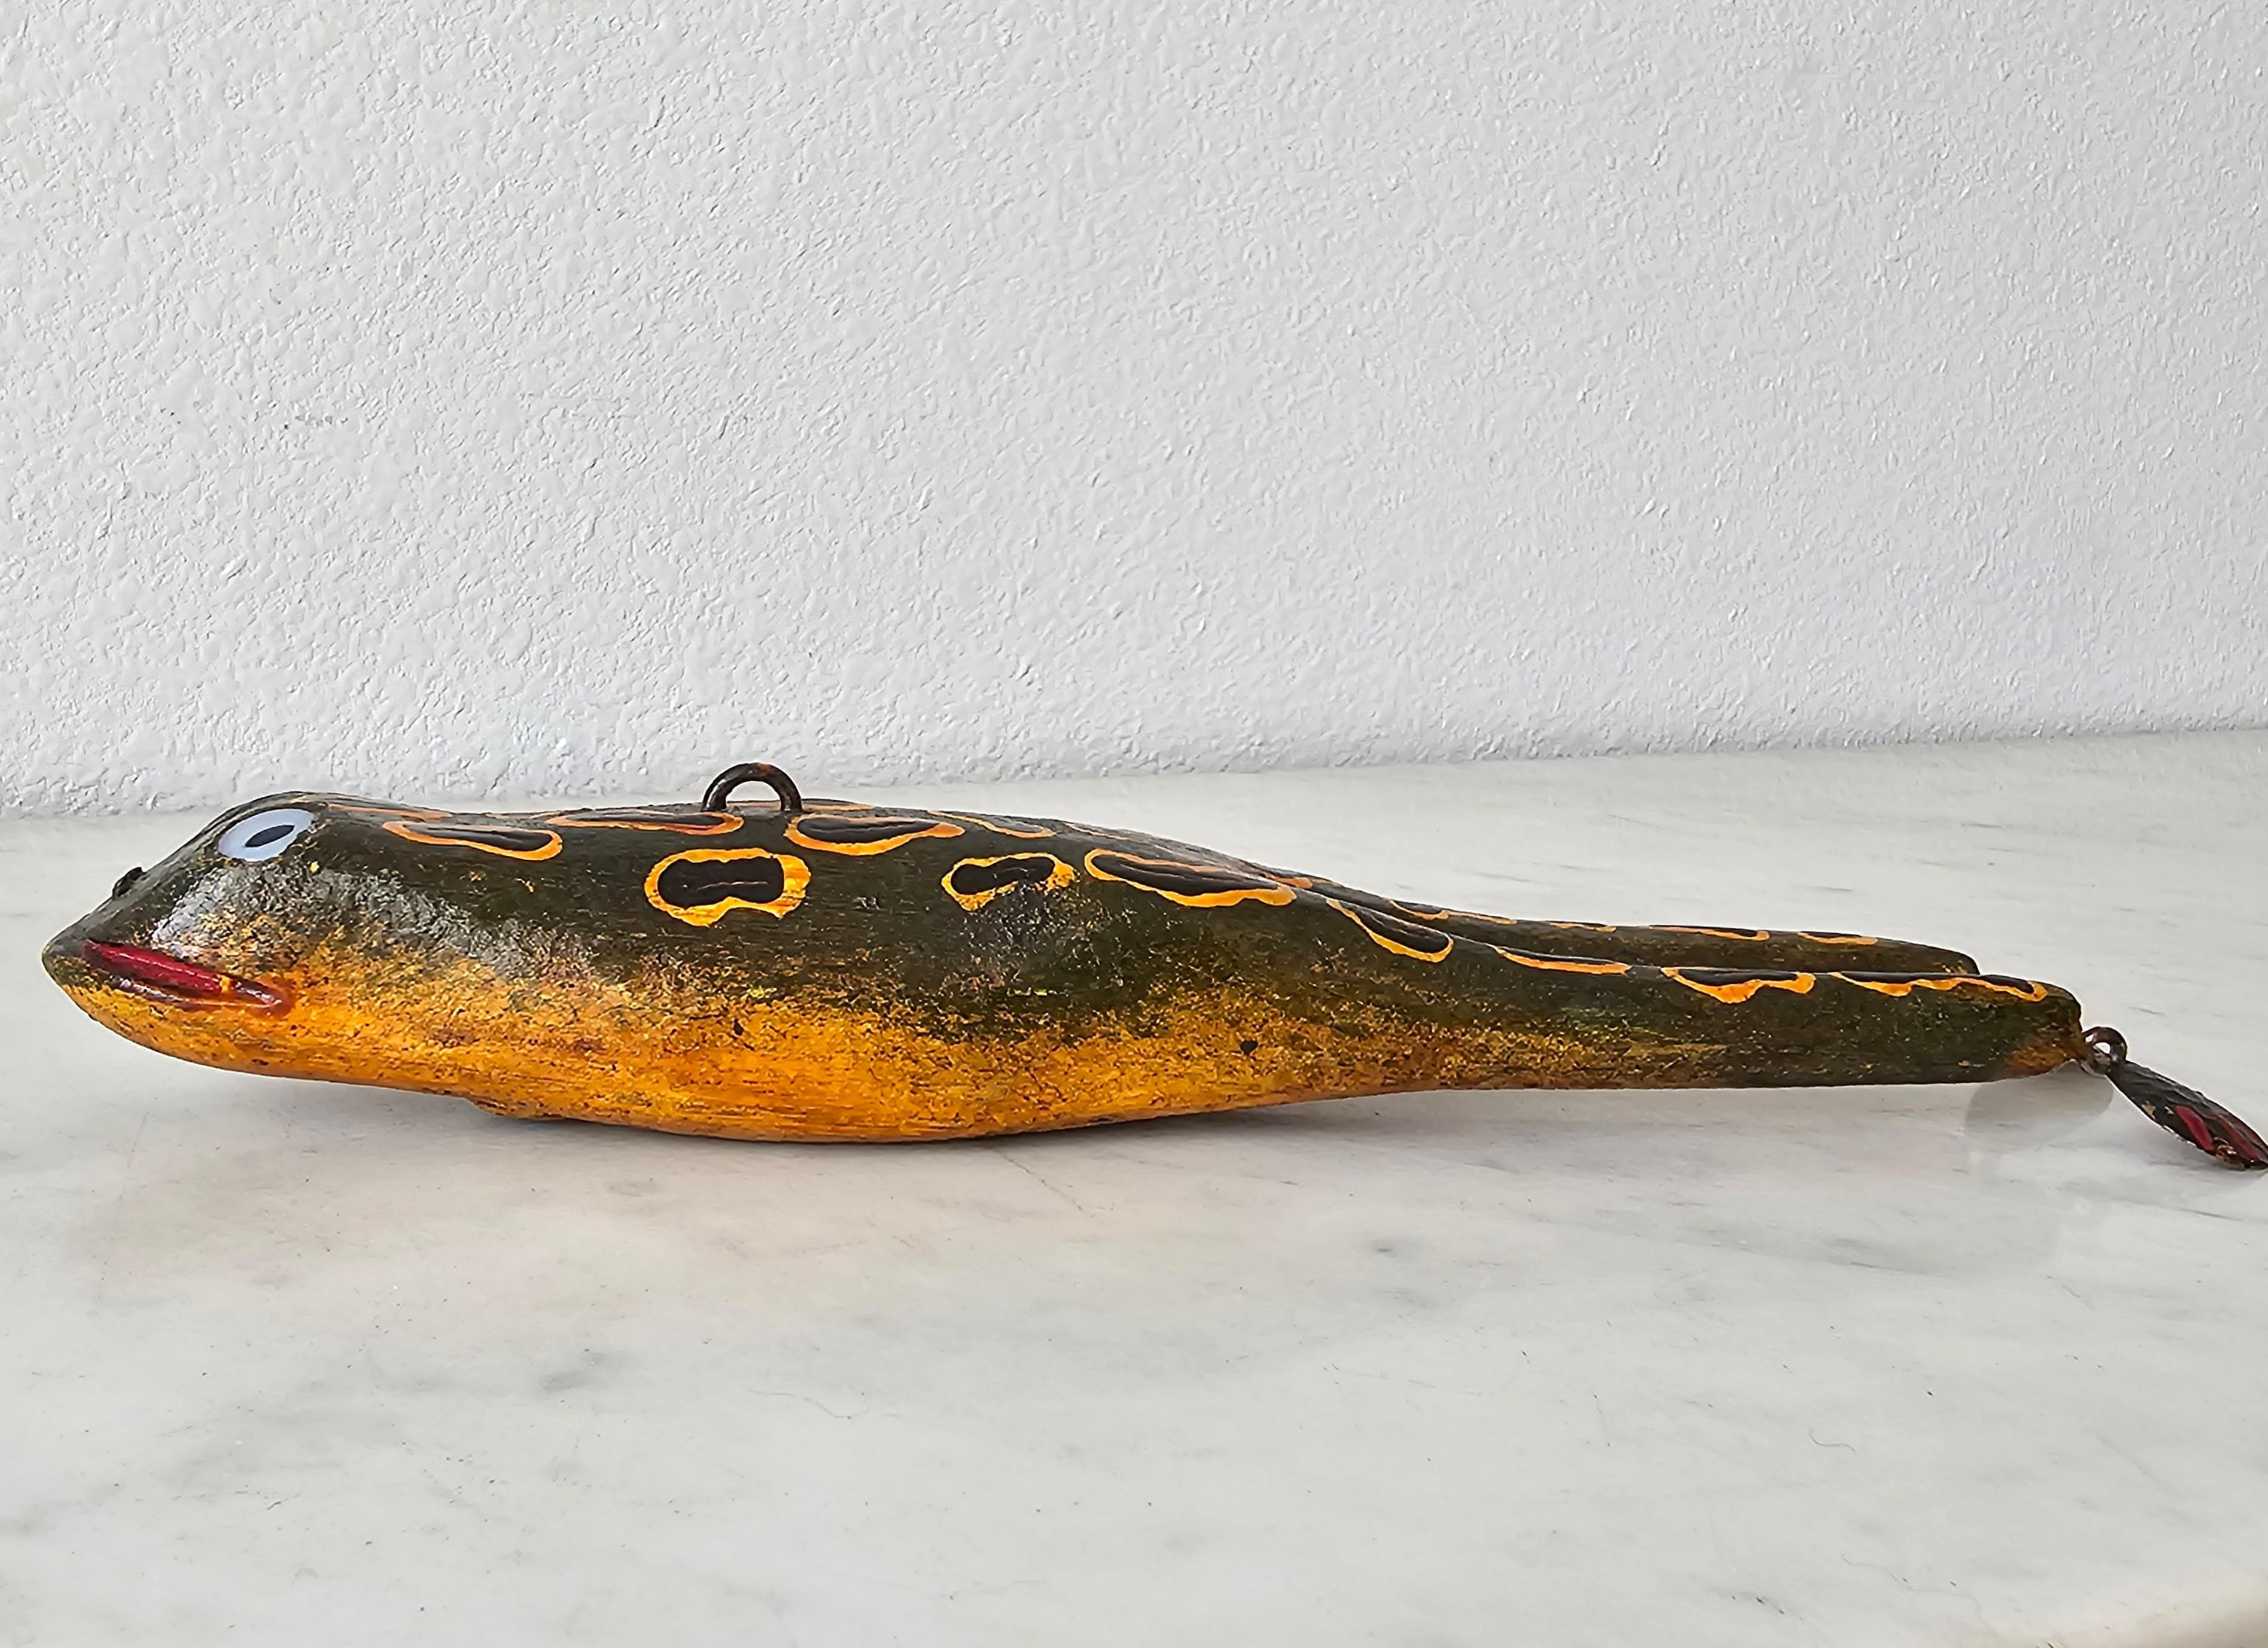 Folk Art American Duluth Fish Decoy DFD Signed Carved Painted Wood Frog Sculpture